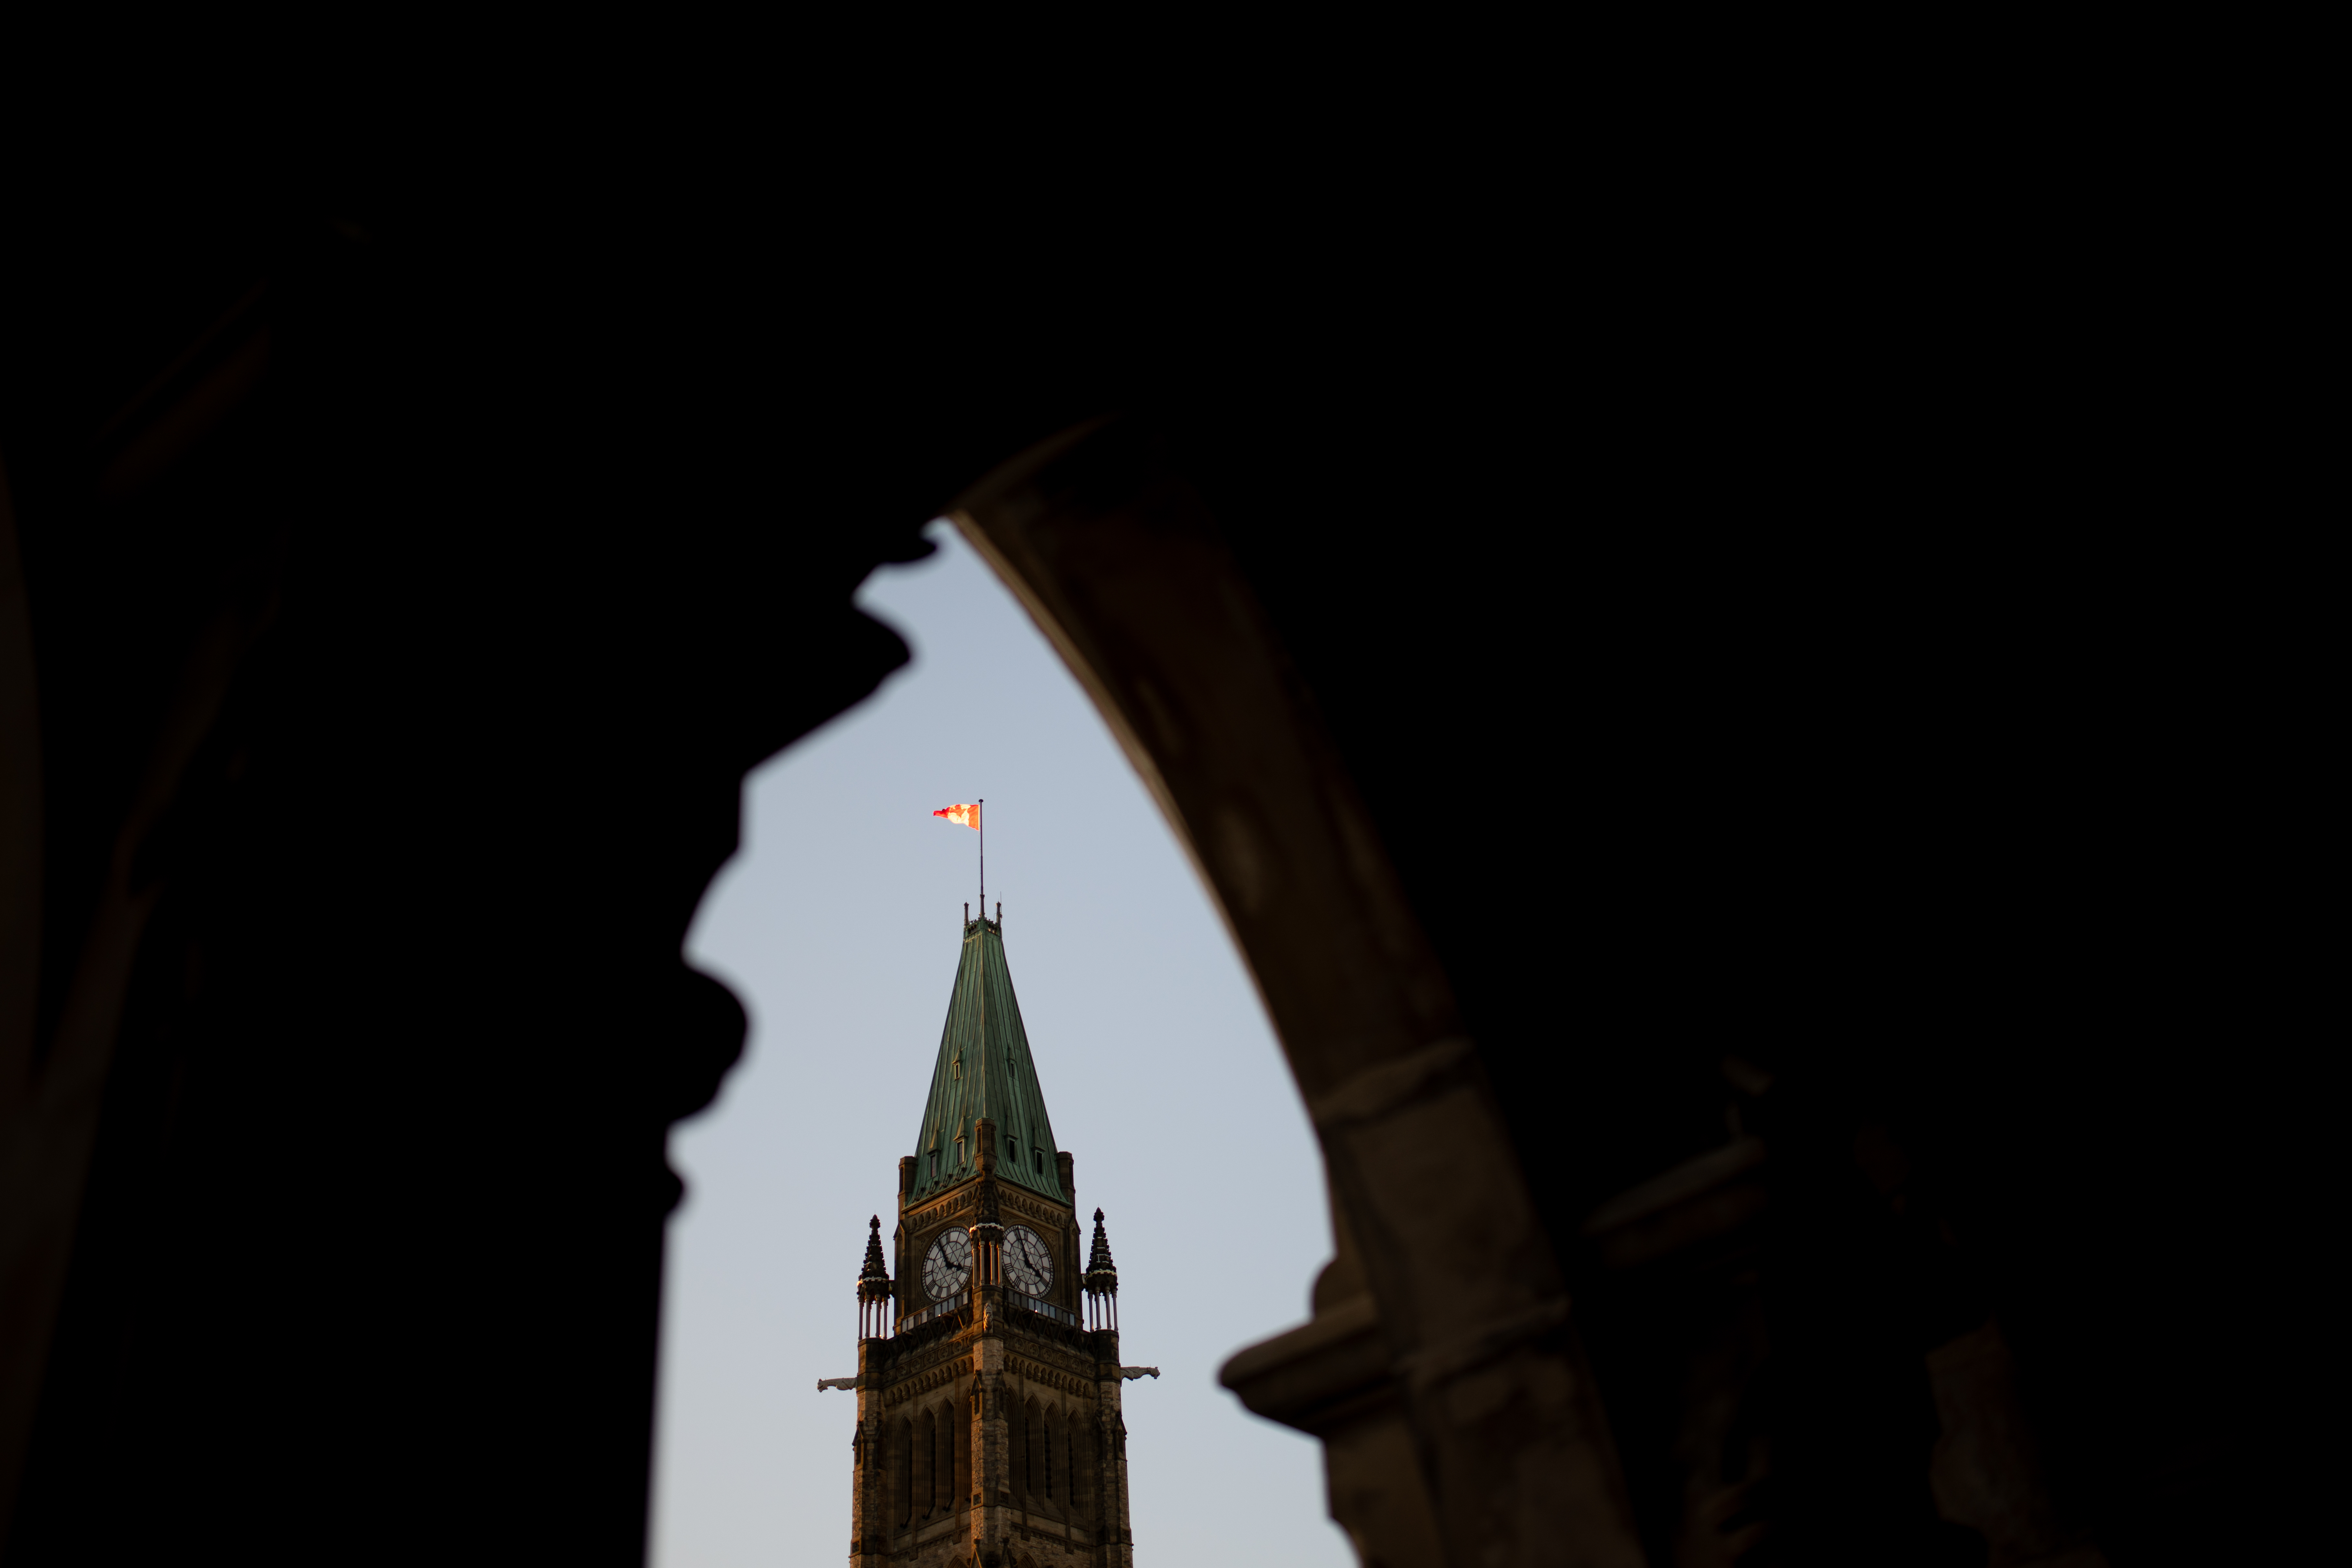 Canada in a ‘bit of a bind’ amid chill in relations with India, China: experts 